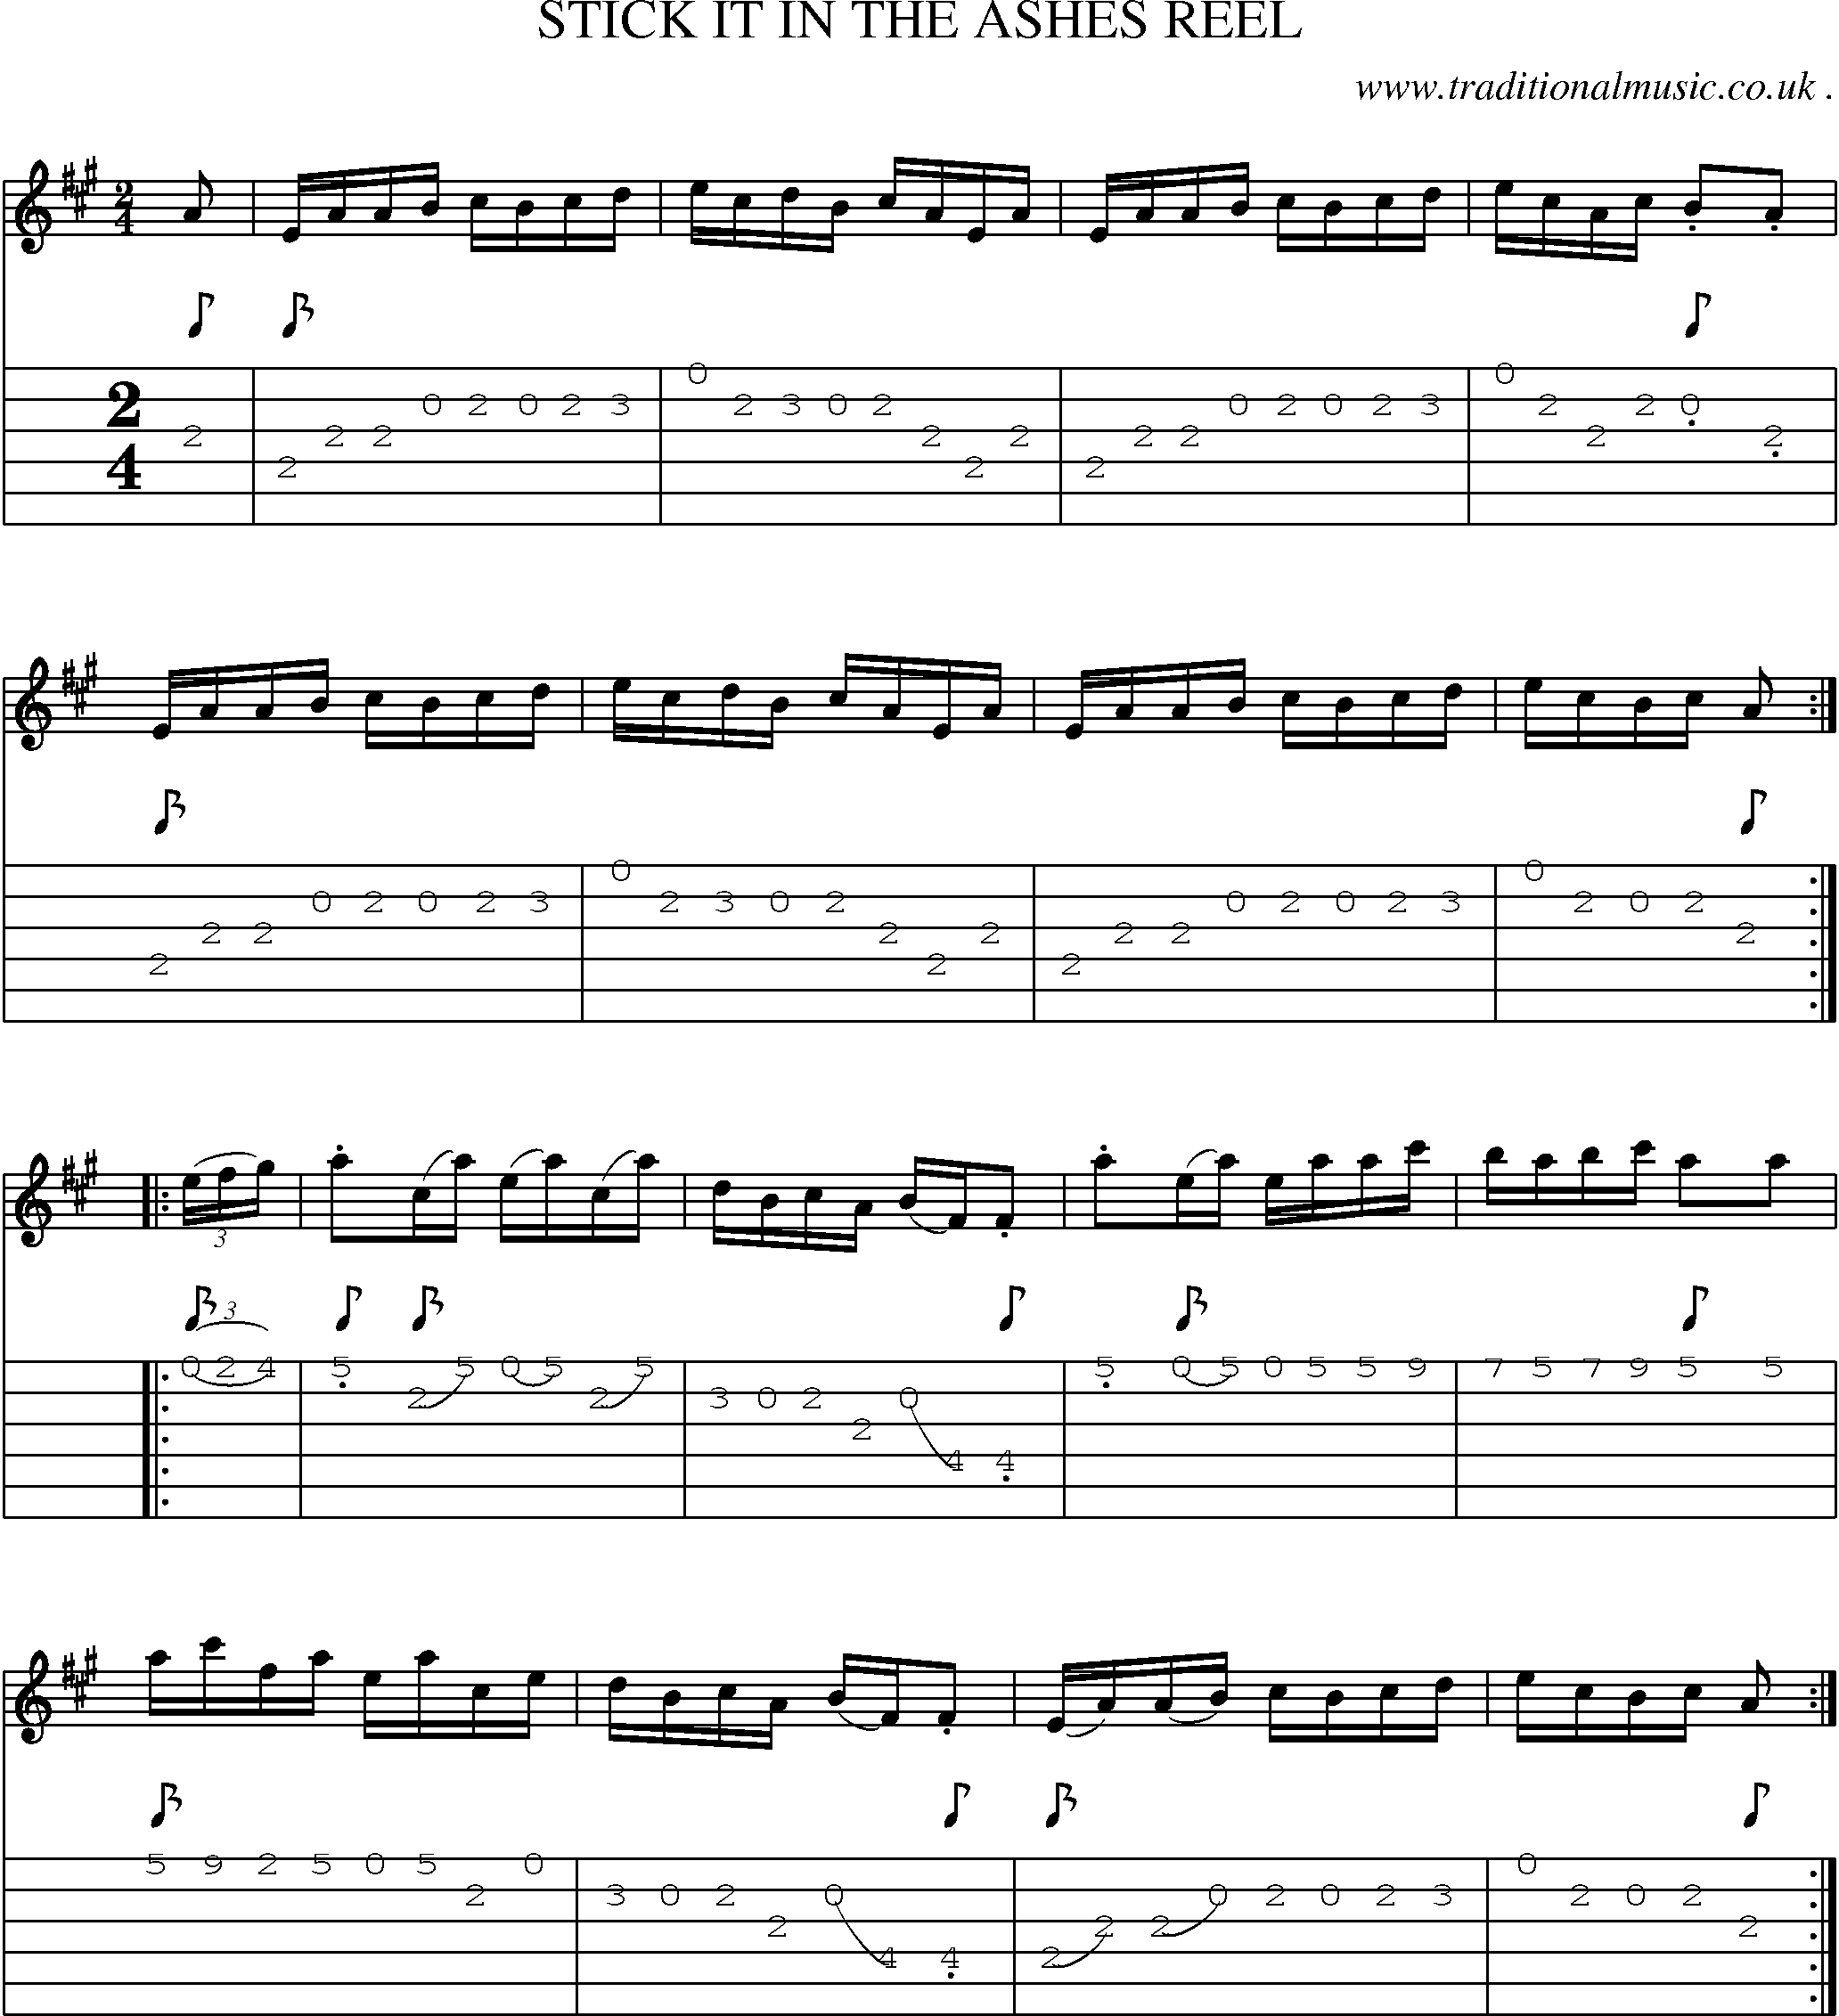 Sheet-Music and Guitar Tabs for Stick It In The Ashes Reel